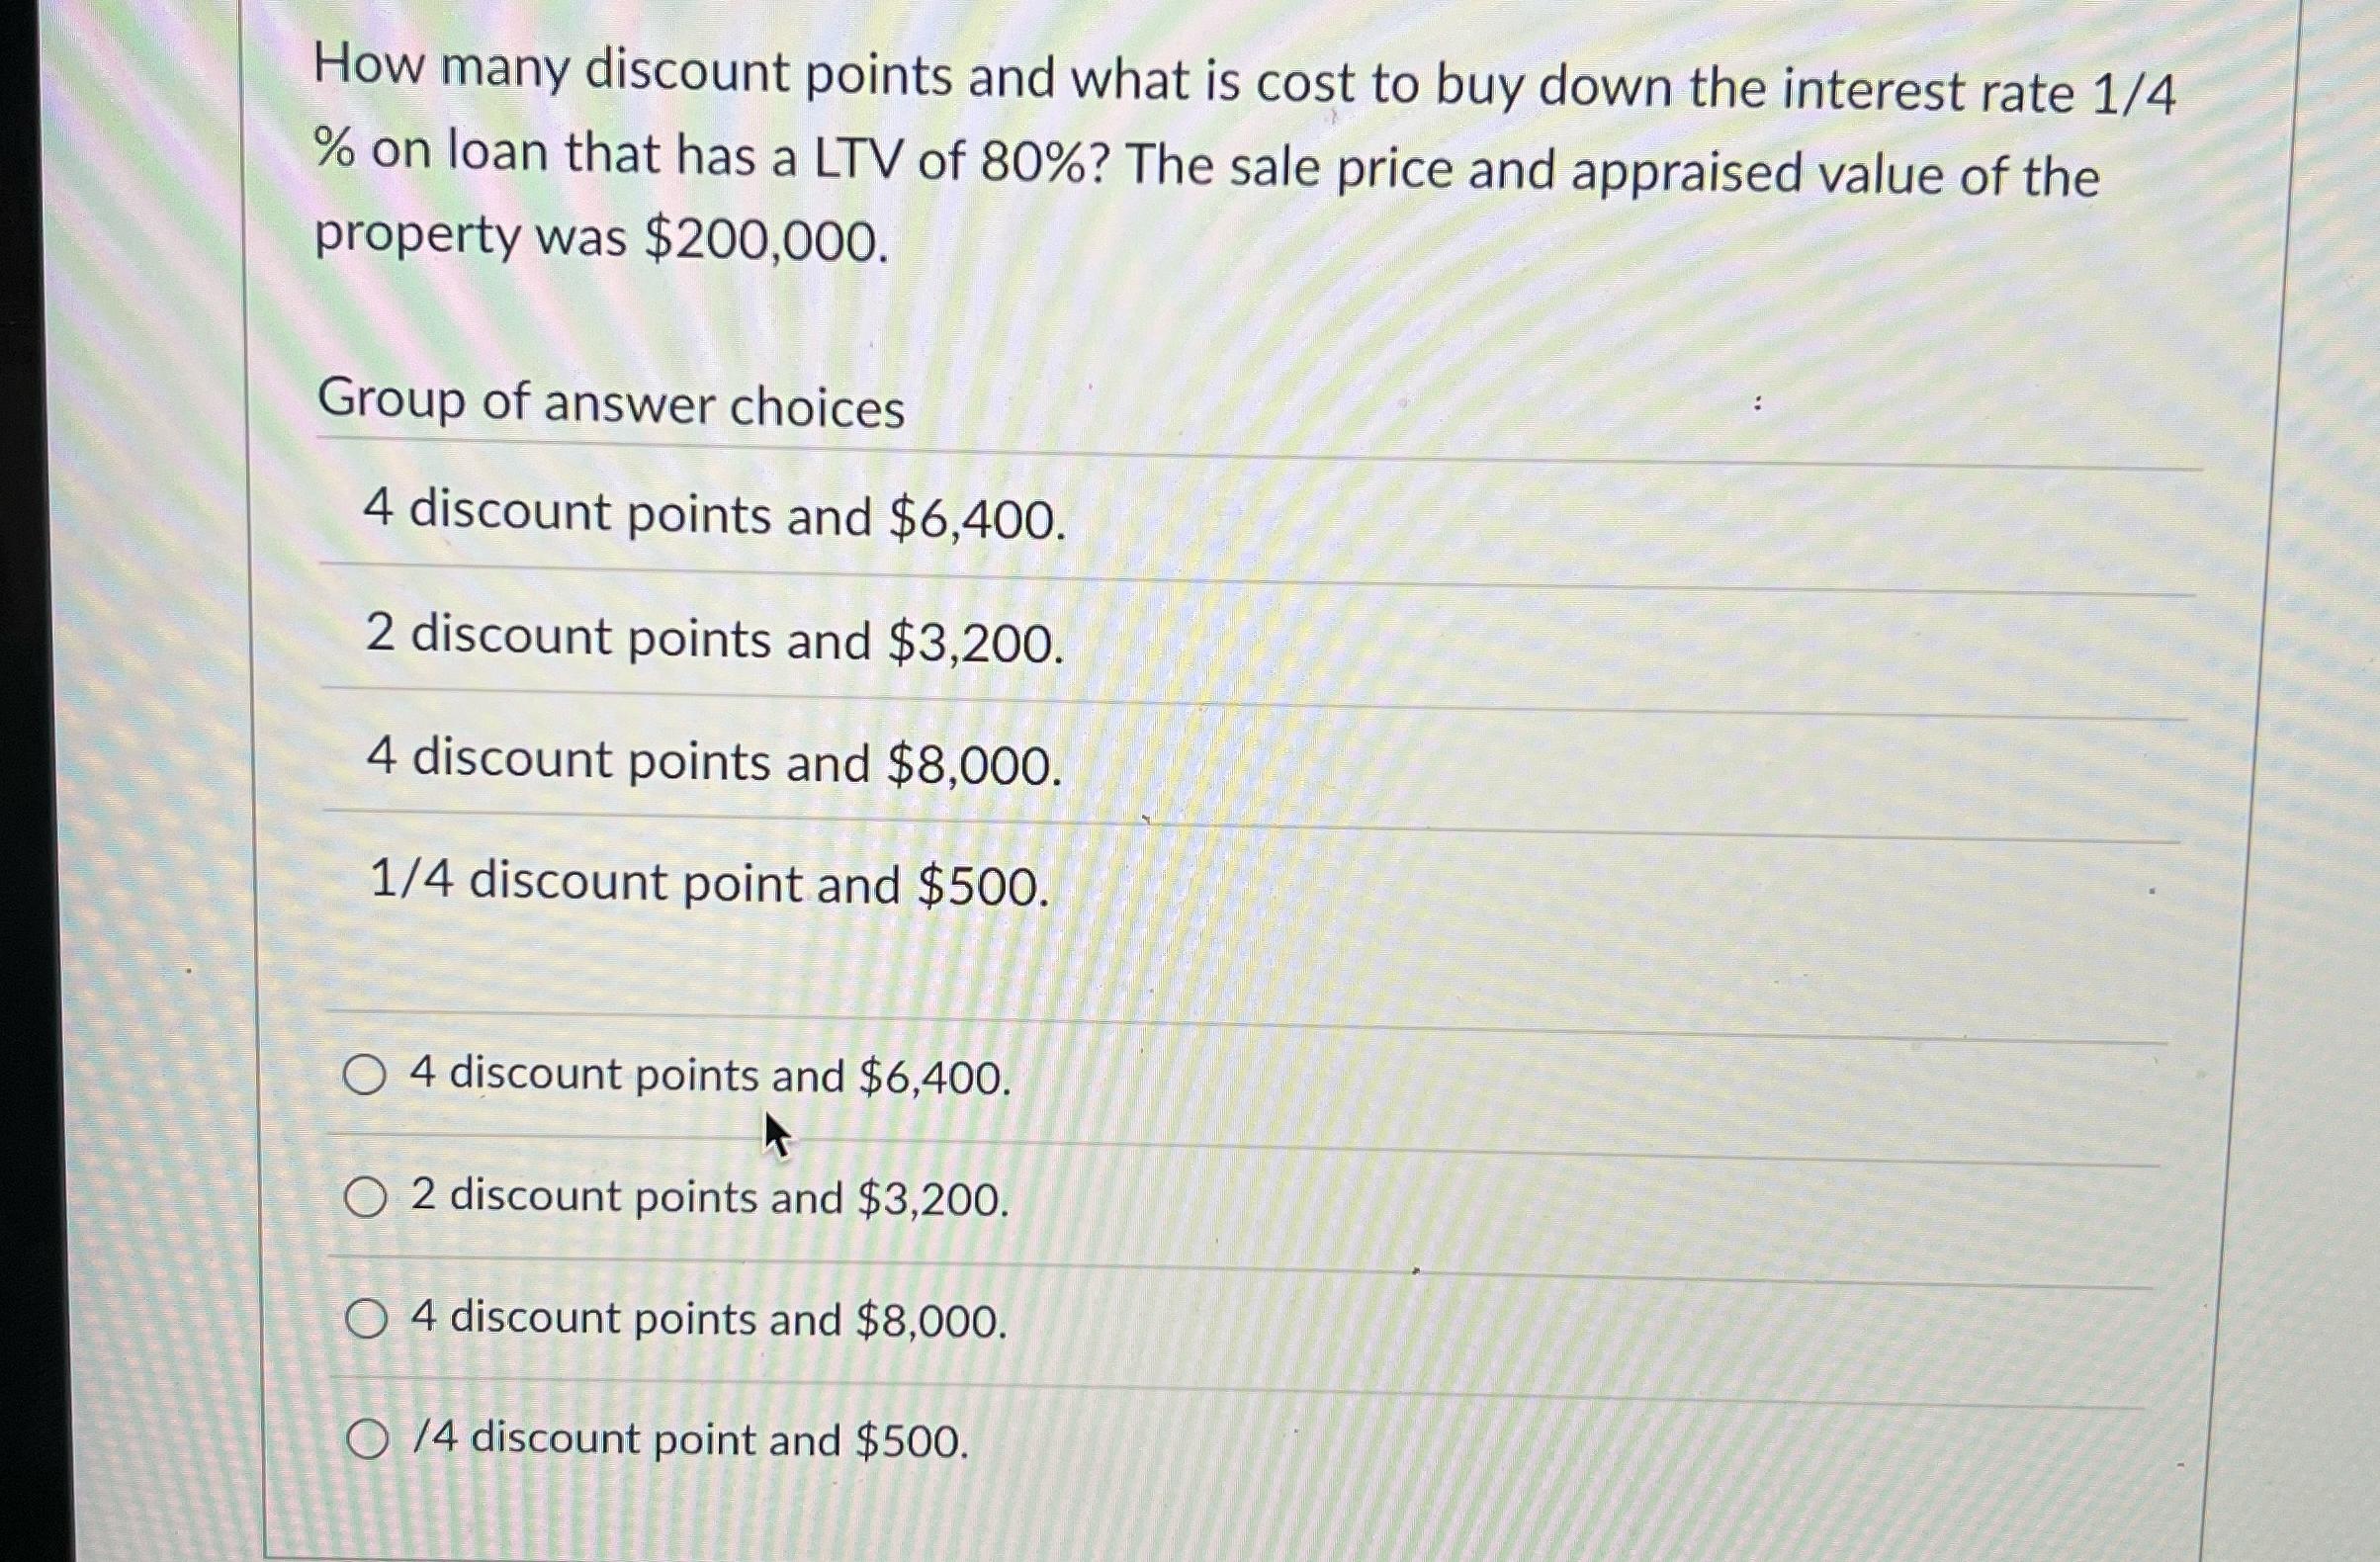 How many discount points and what is cost to buy down the interest rate 1/4 % on loan that has a LTV of 80%?